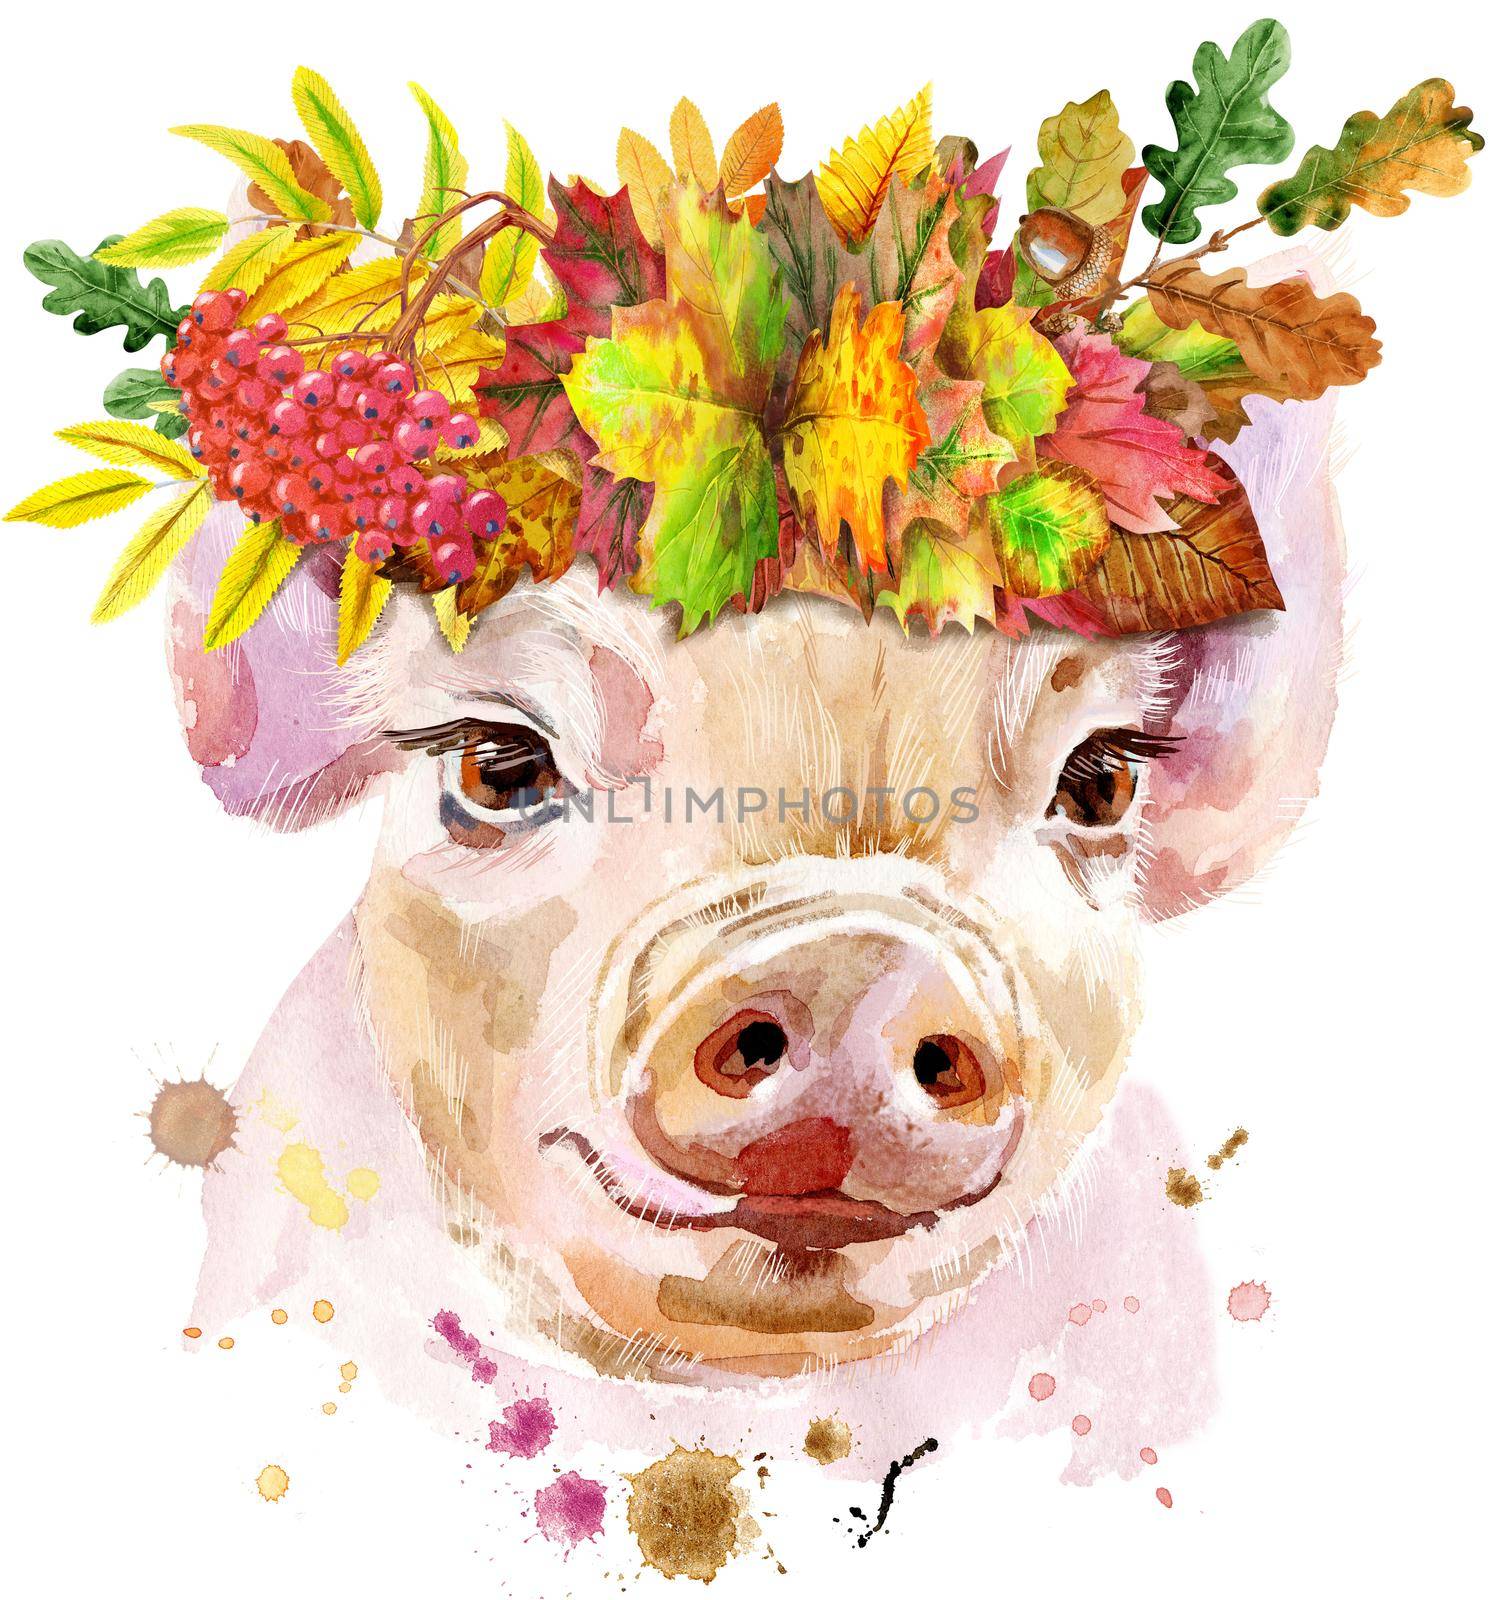 Cute piggy with wreath of leaves. Pig for T-shirt graphics. Watercolor pink mini pig illustration